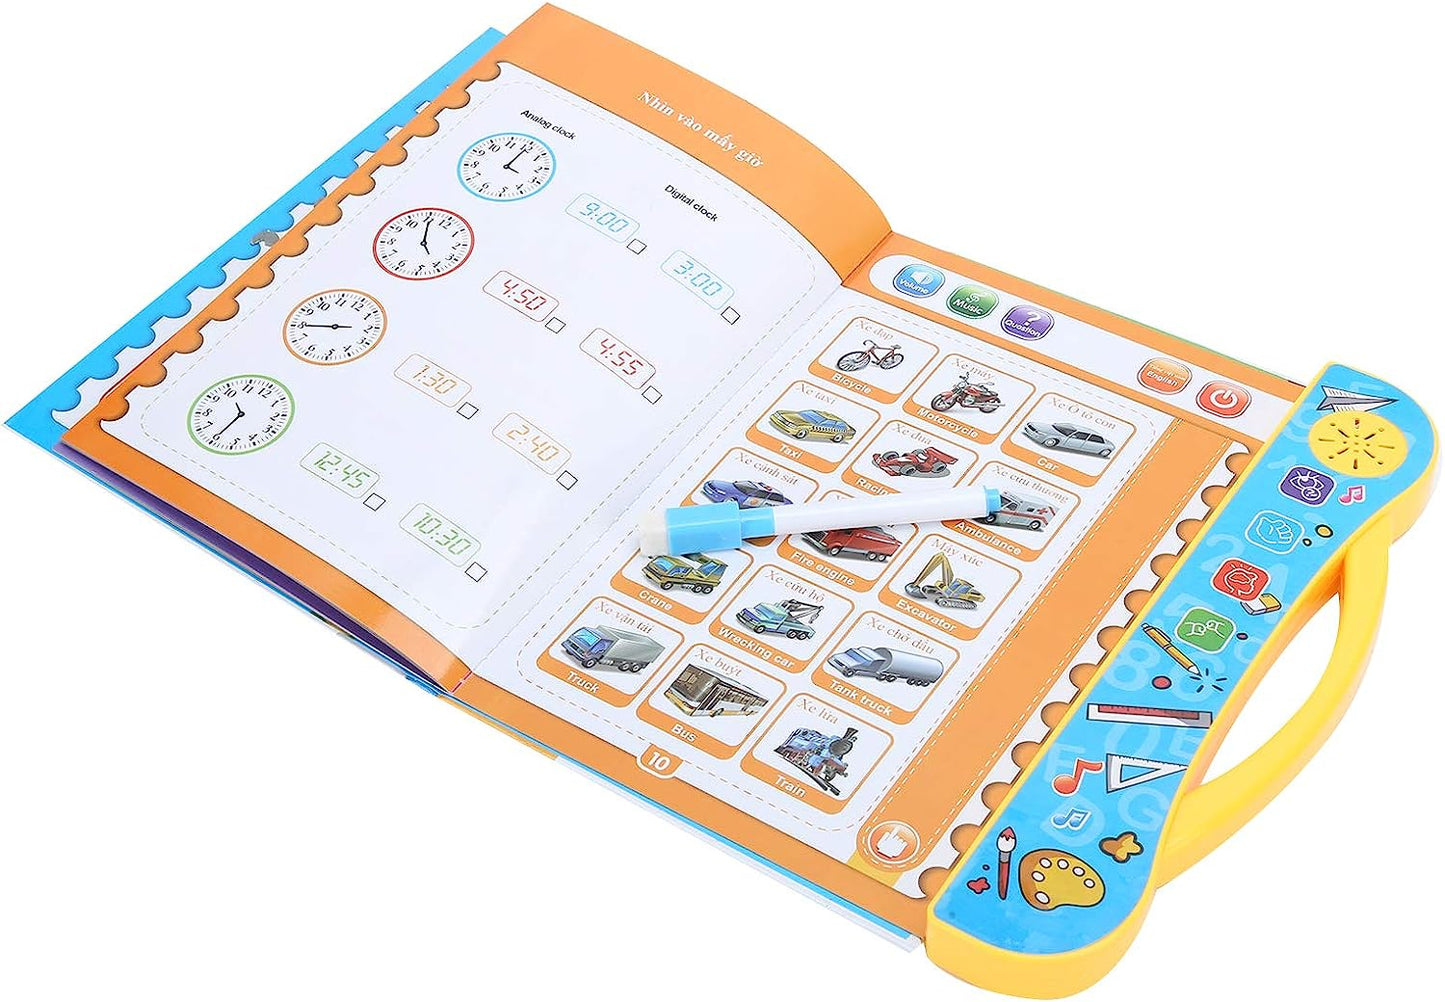 Reading Machine Toy, Vietnamese English EBook, Children Early Educational Learning Toy, for Kids Wonderful Gift Boys and Girls Language Learning